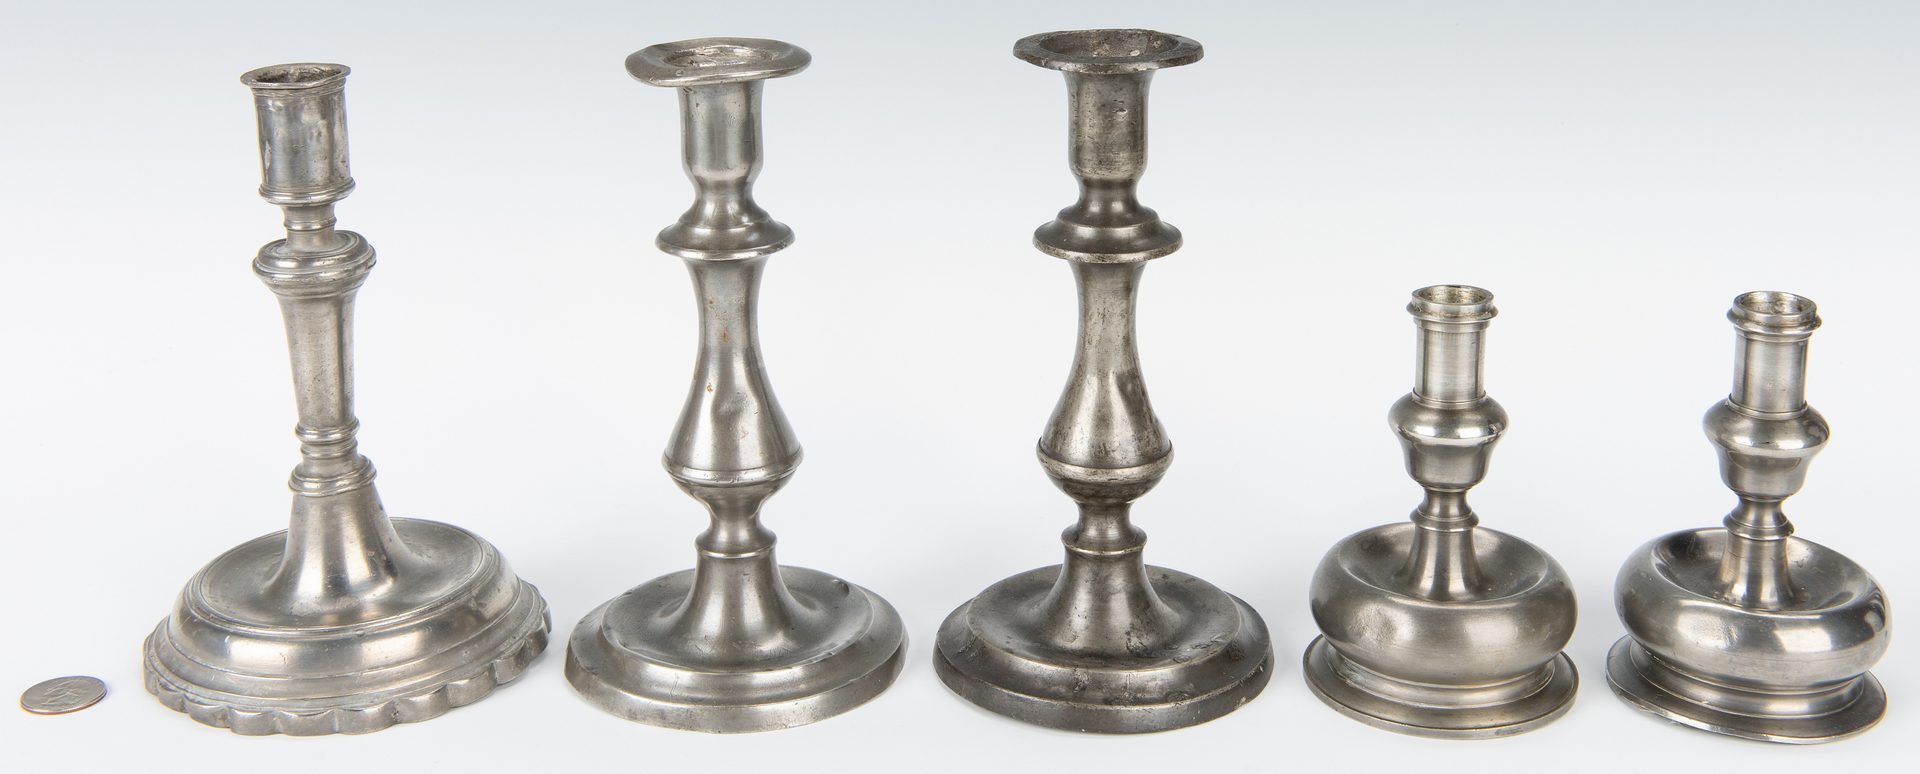 Lot 350: Group of 5 Pewter Candlesticks & 4 Wallpaper Boxes, New England